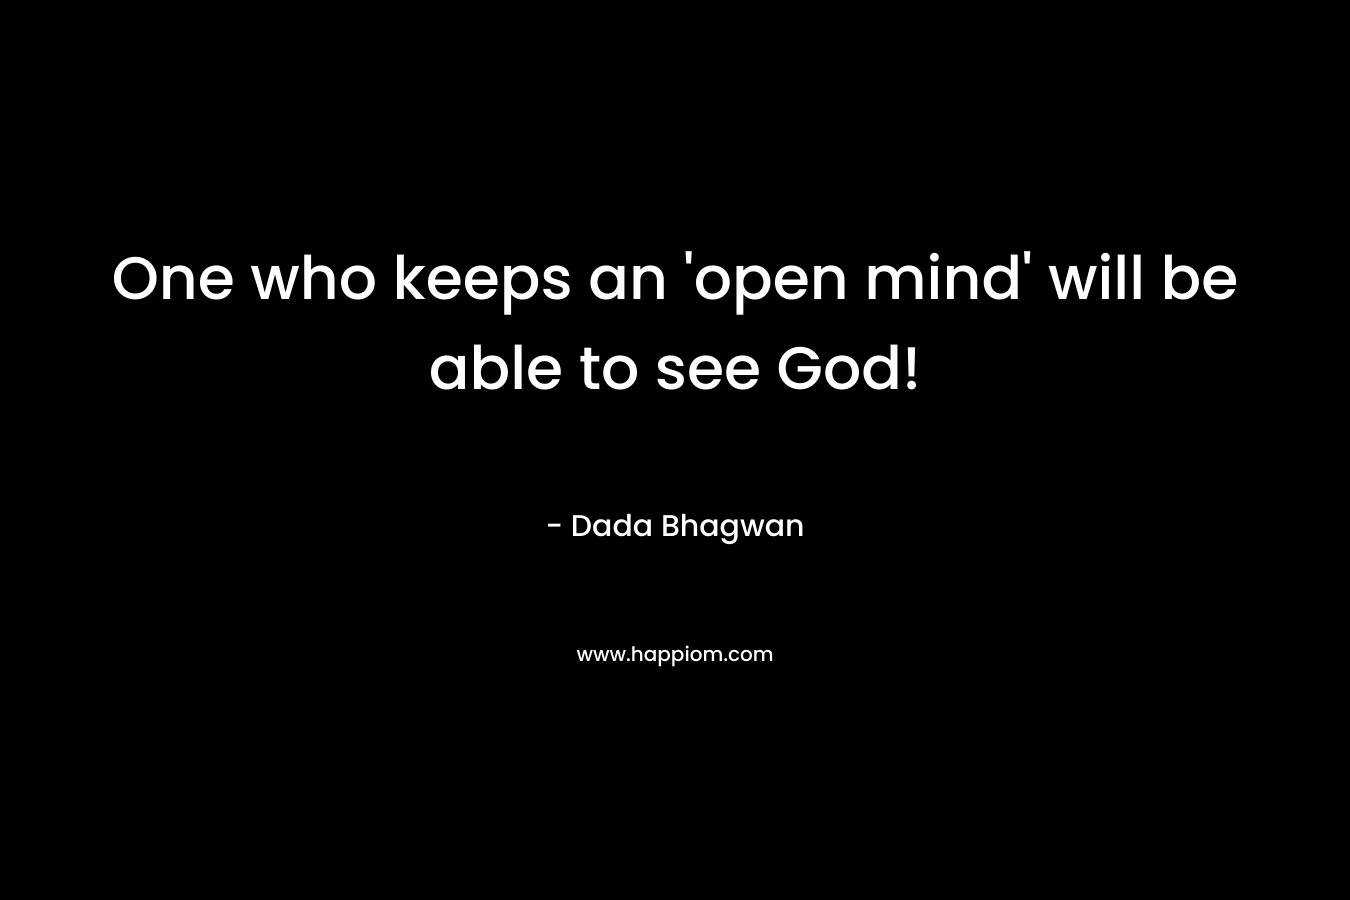 One who keeps an 'open mind' will be able to see God!